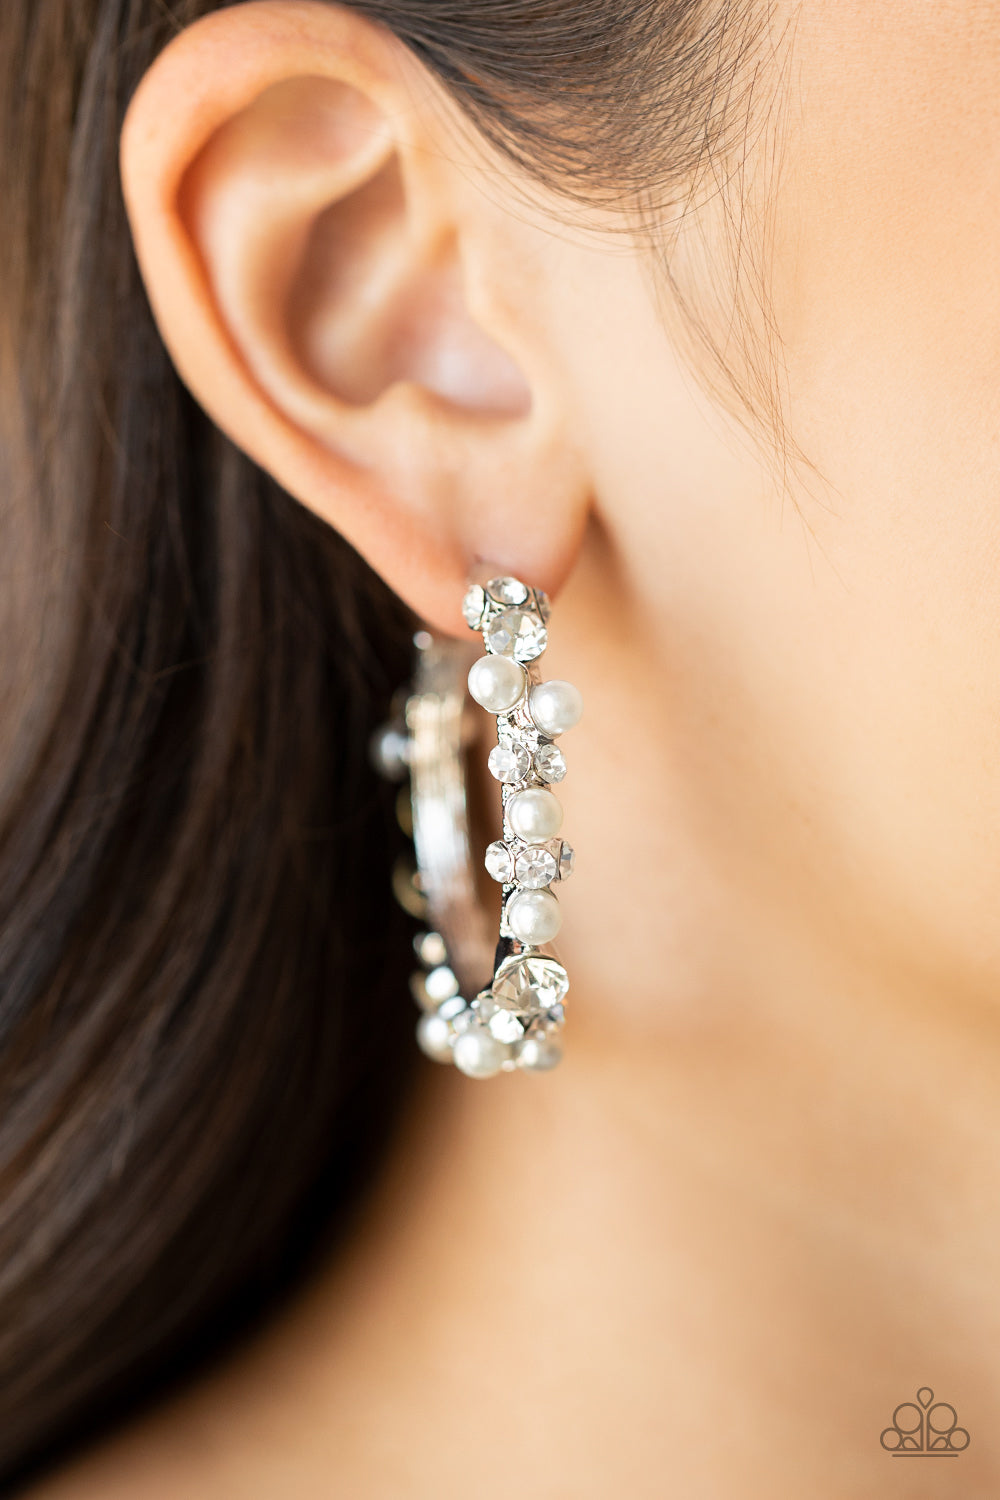 Let There Be SOCIALITE - White - Paparazzi earrings